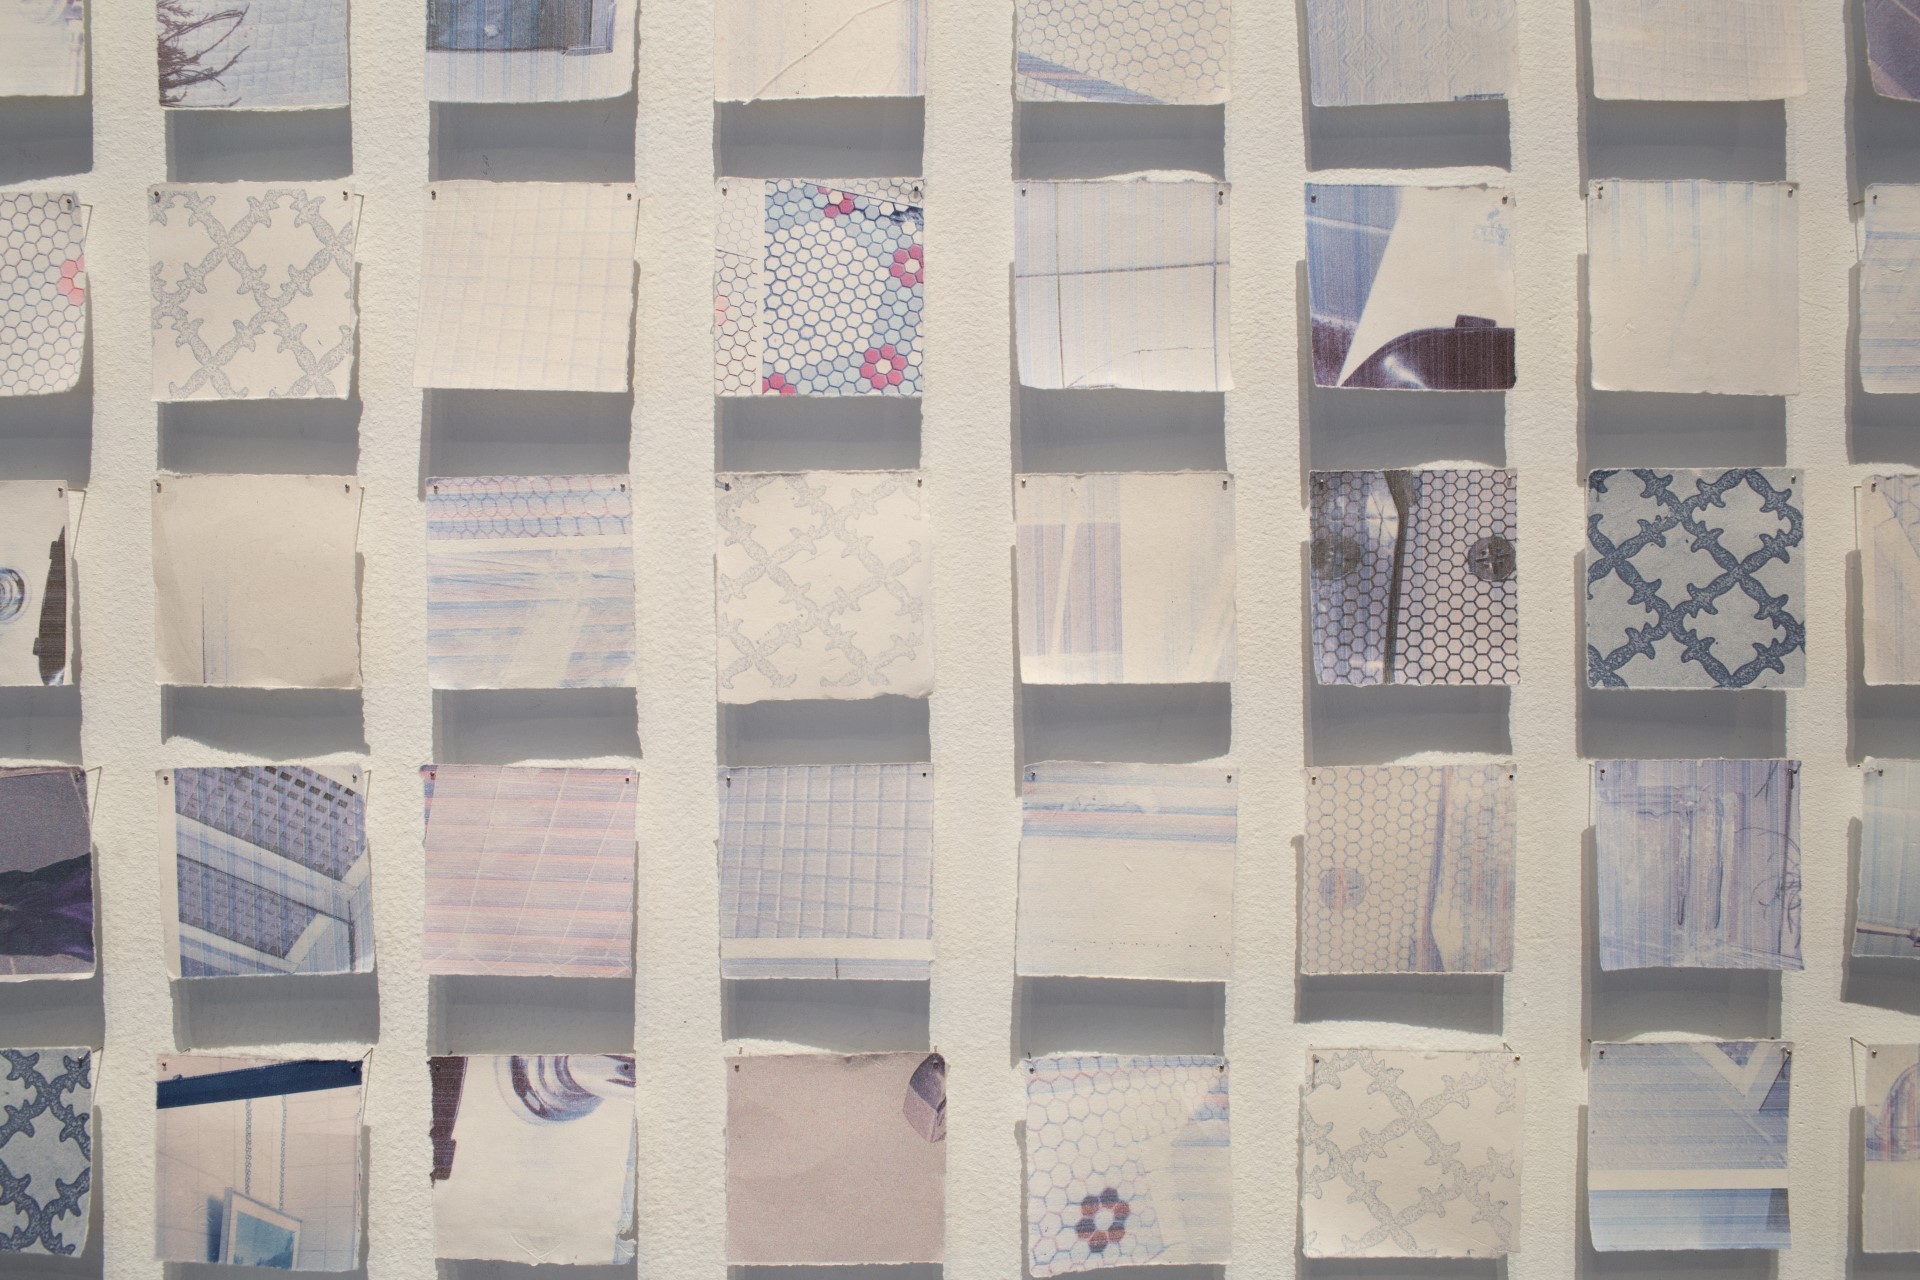 Detailed documentation of the work vestiges de nos déshabillements. This photo features a grid of photographed bathroom tiles printed on paper made out of toilet paper. 